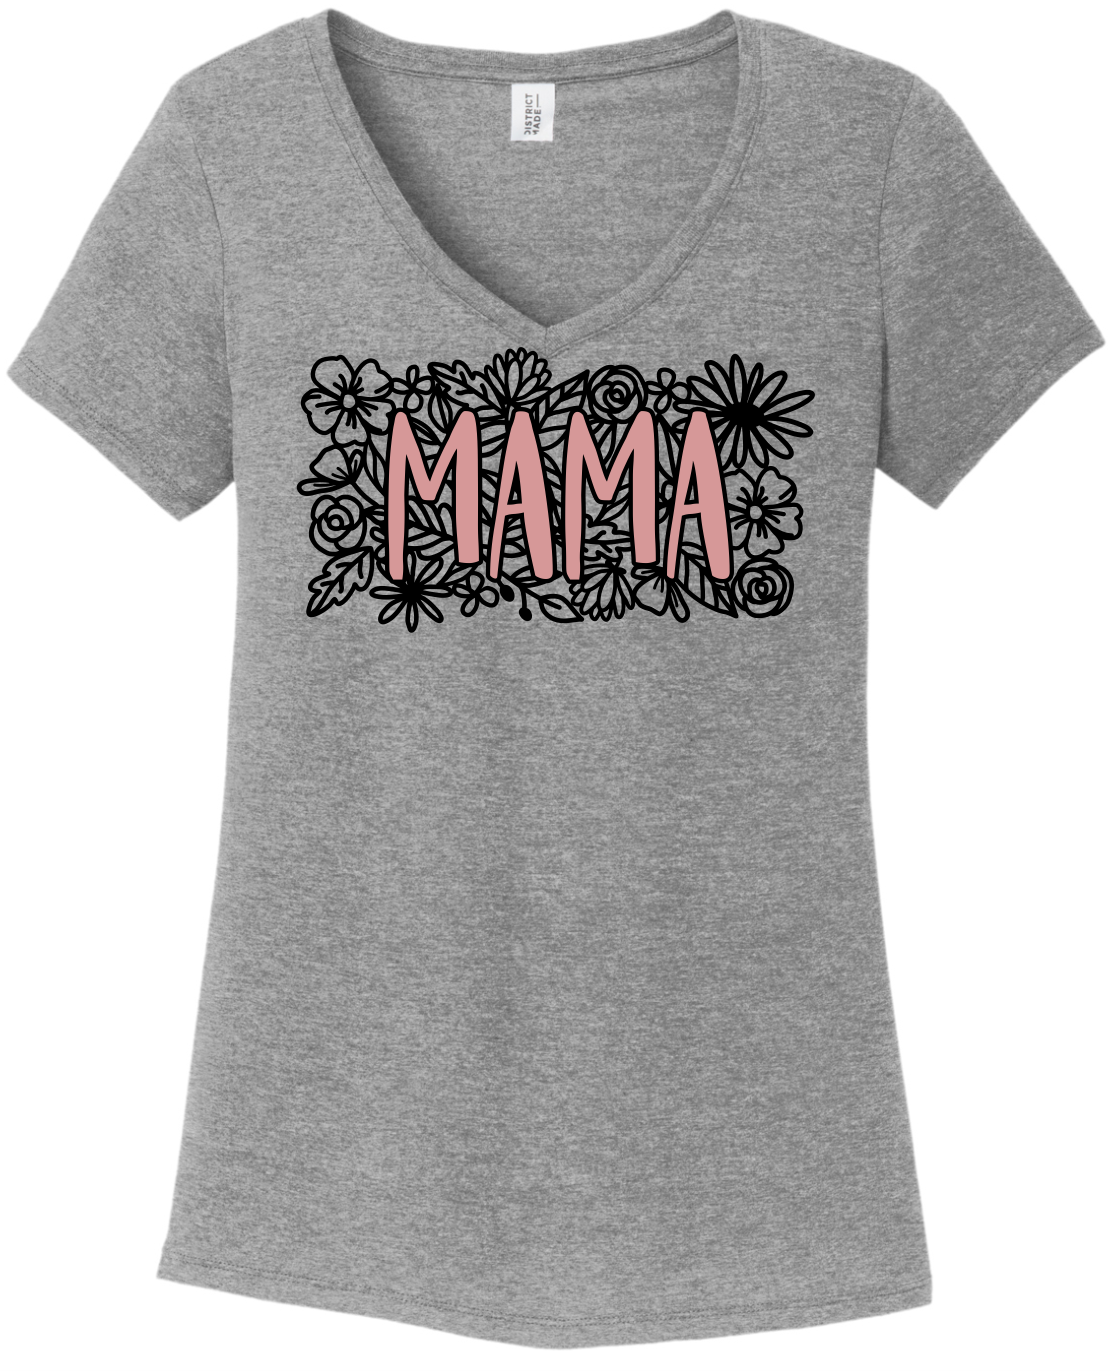 MAMA Floral (soft t)